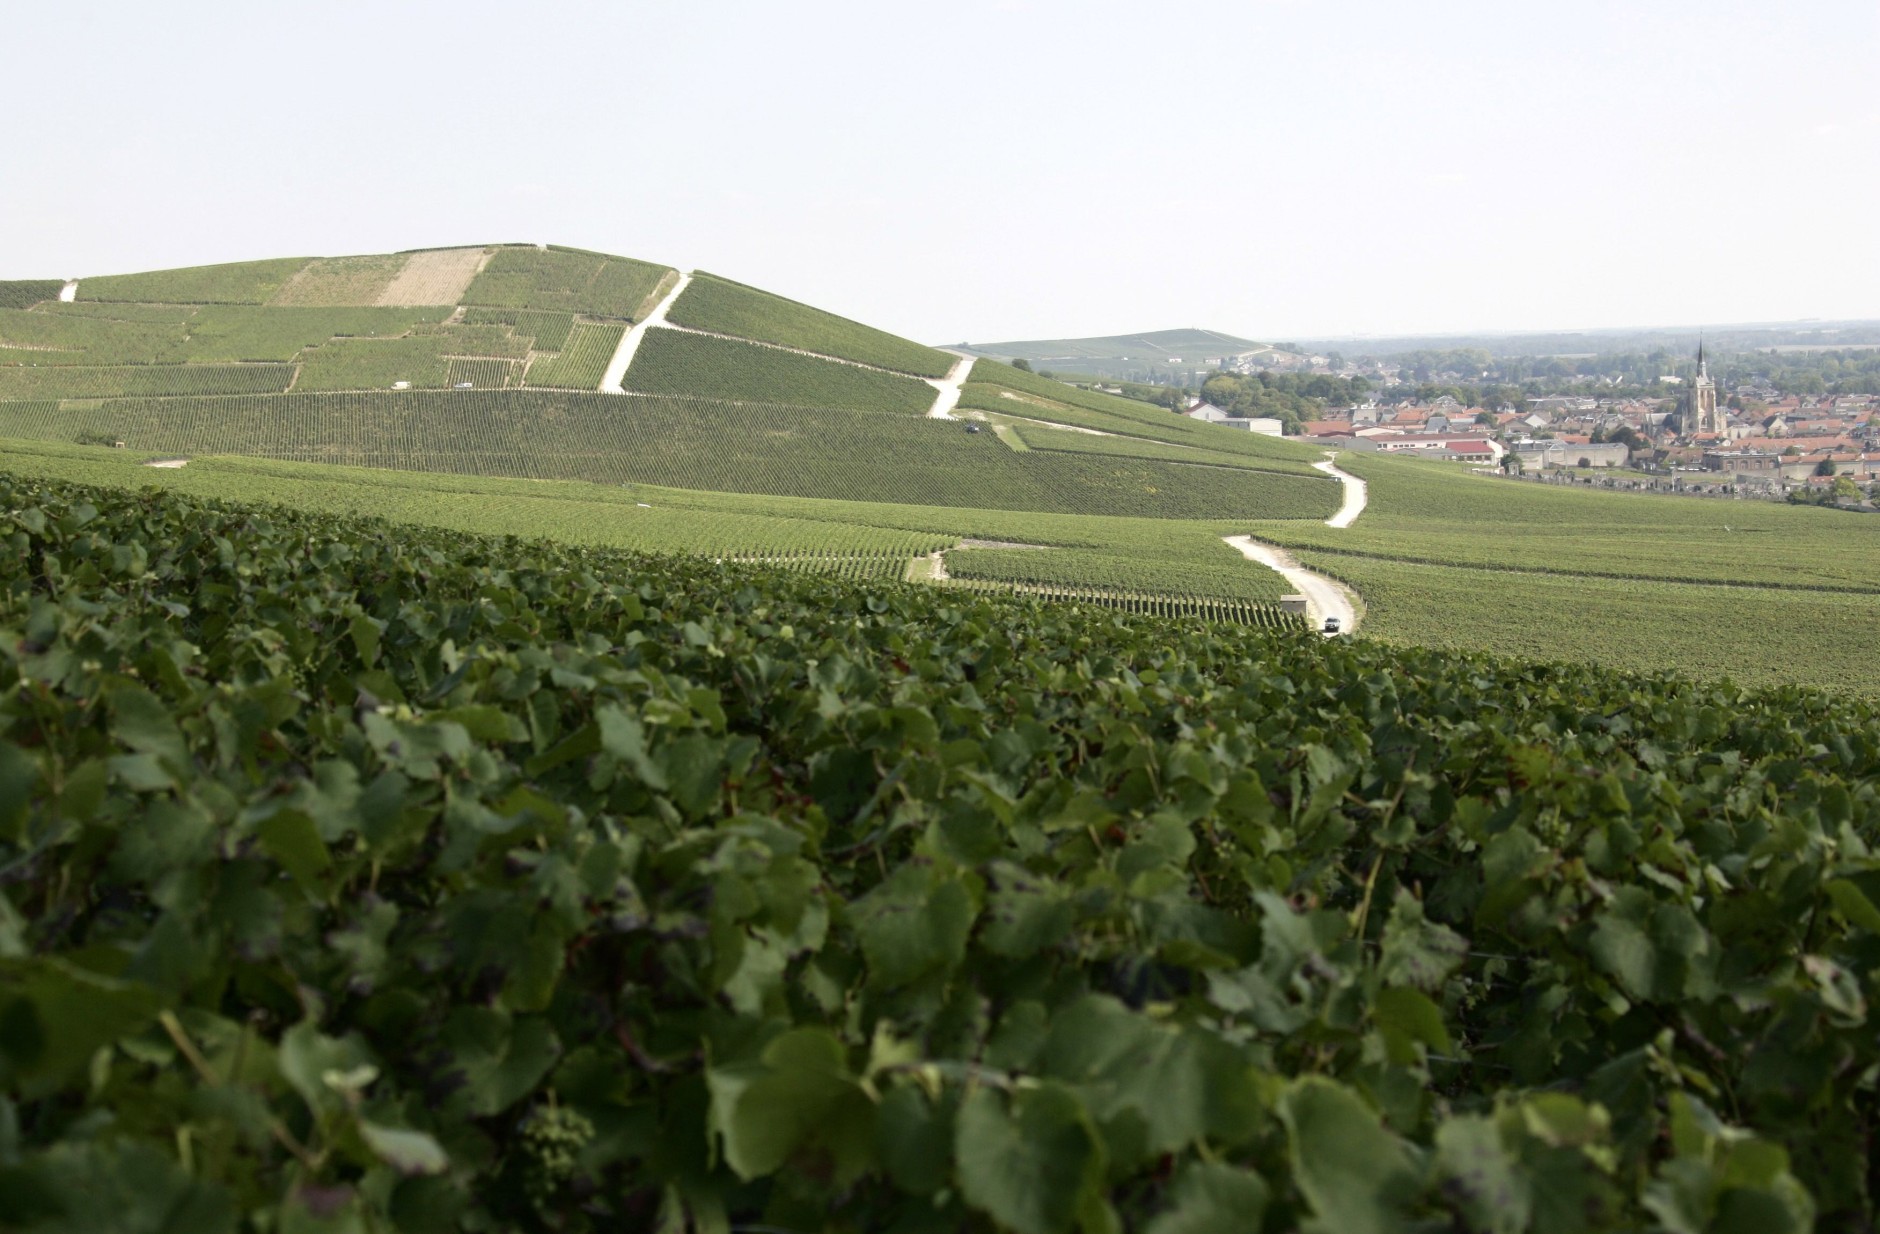 ** FILES ** A view of Champagne vineyards near Epernay, eastern France is seen in this Aug. 30, 2007 file photo. France's venerable body in charge of food and drink labels is looking into expanding the area where Champagne is made, amid growing global demand for the luxurious bubbly beverage. (AP Photo/Francois Mori, files)